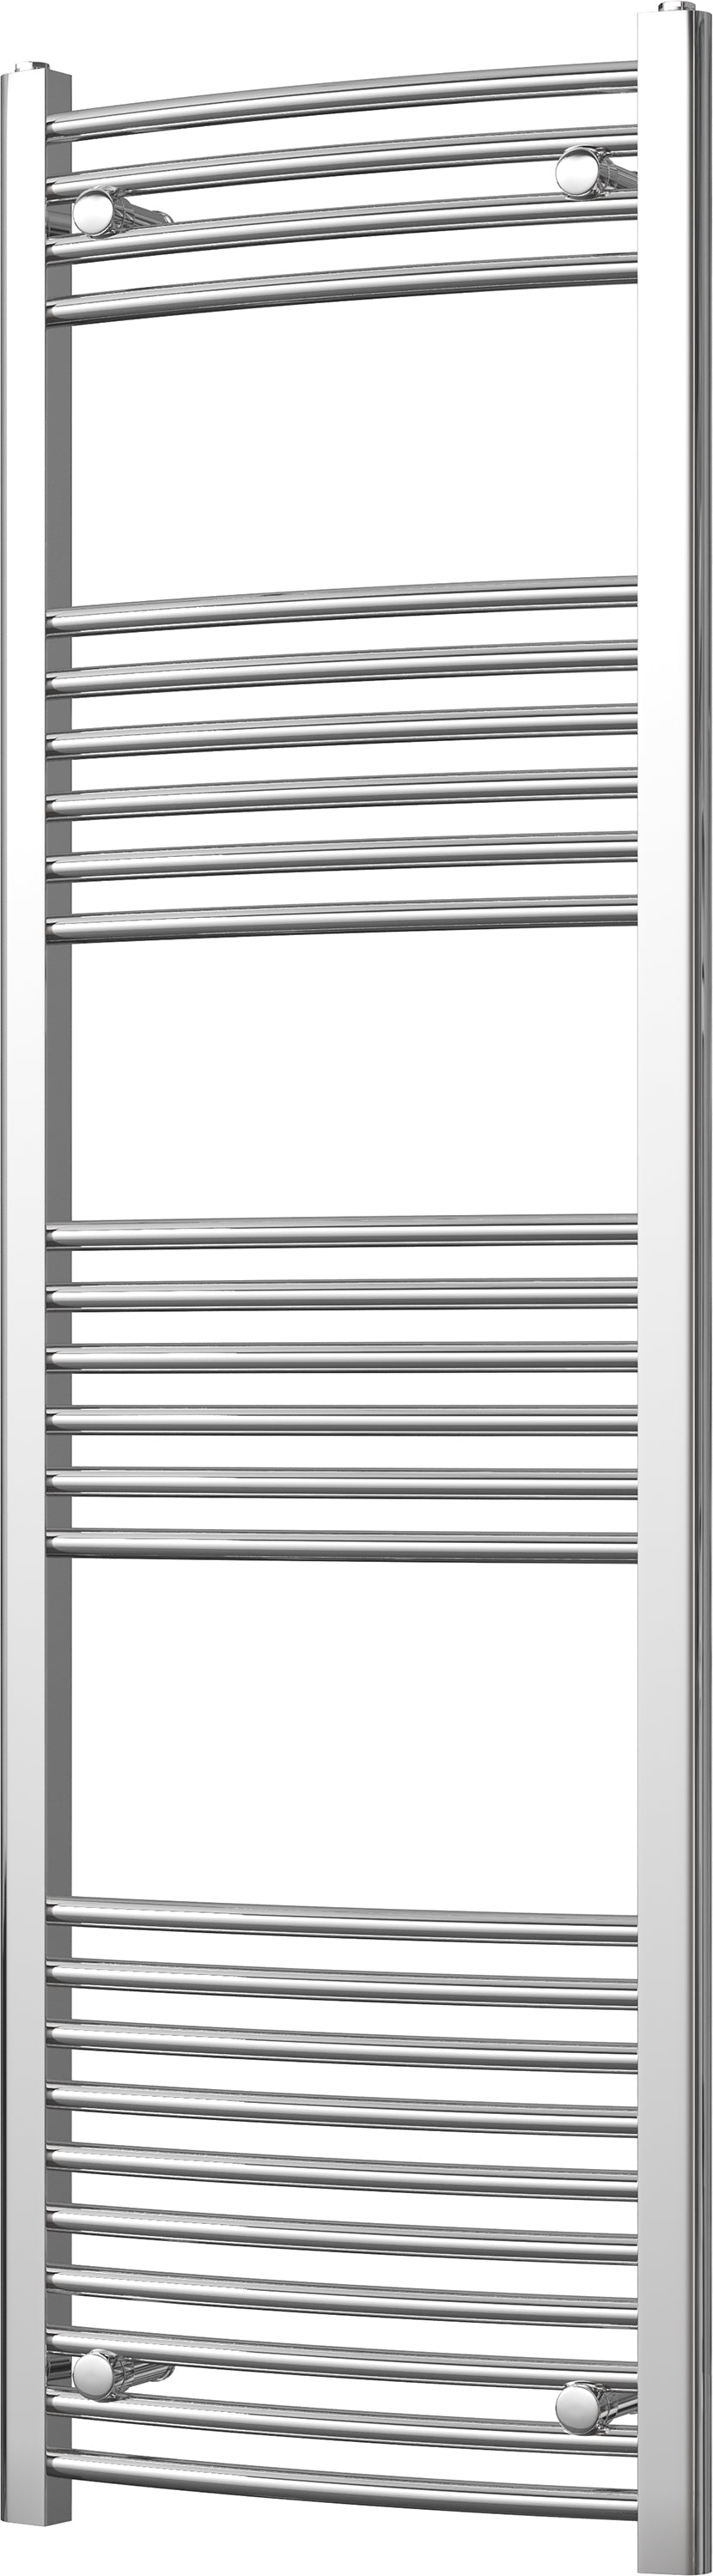 Zennor - Chrome Heated Towel Rail - H1600mm x W500mm - Curved